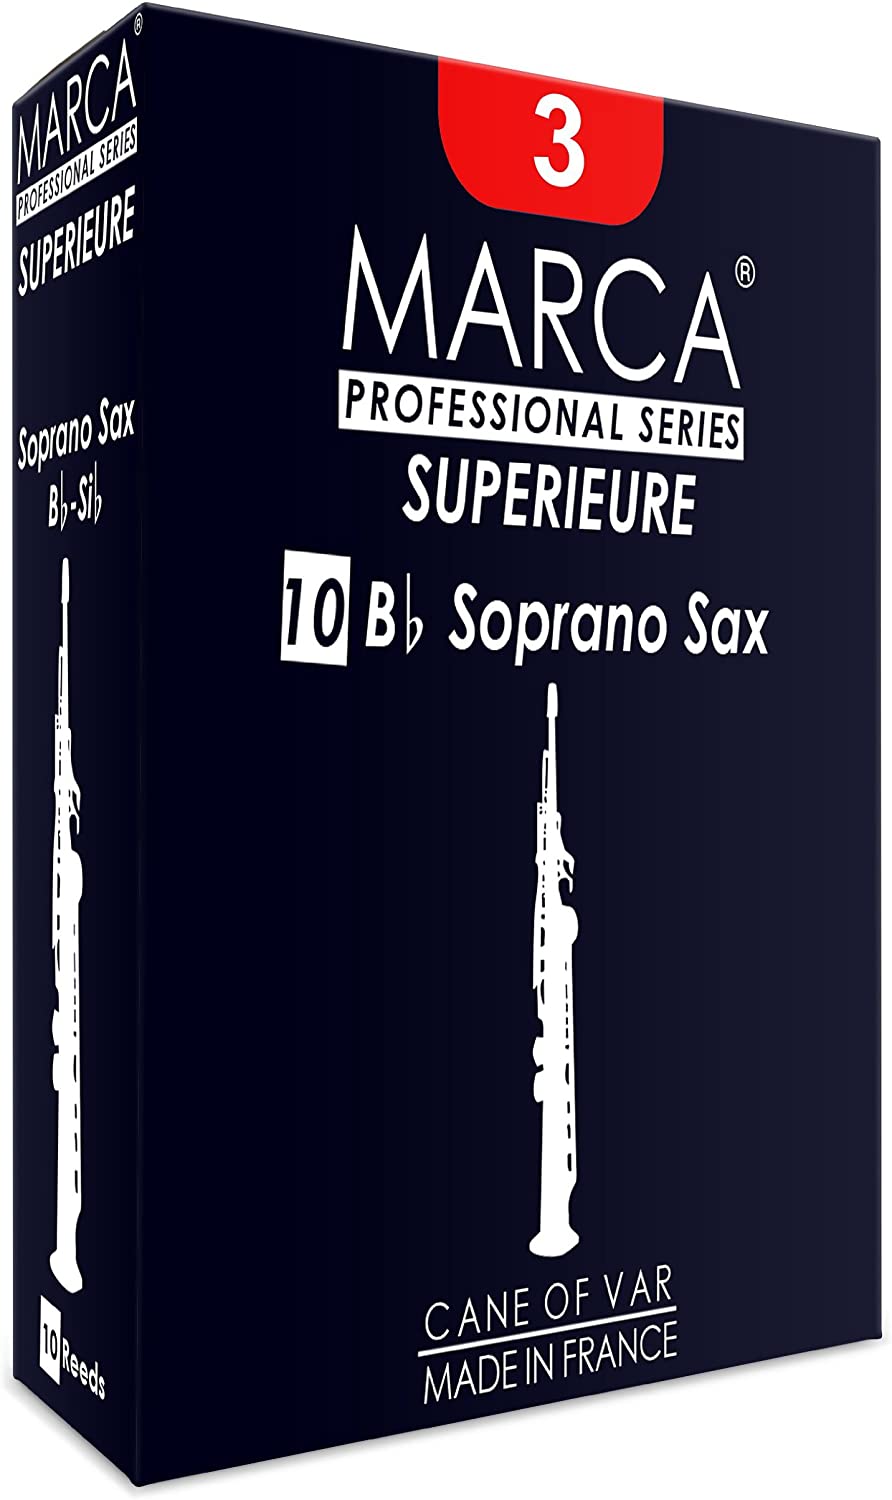 Marca Superieure Soprano Saxophone Reeds - Box of 10 Strings, Bows & More